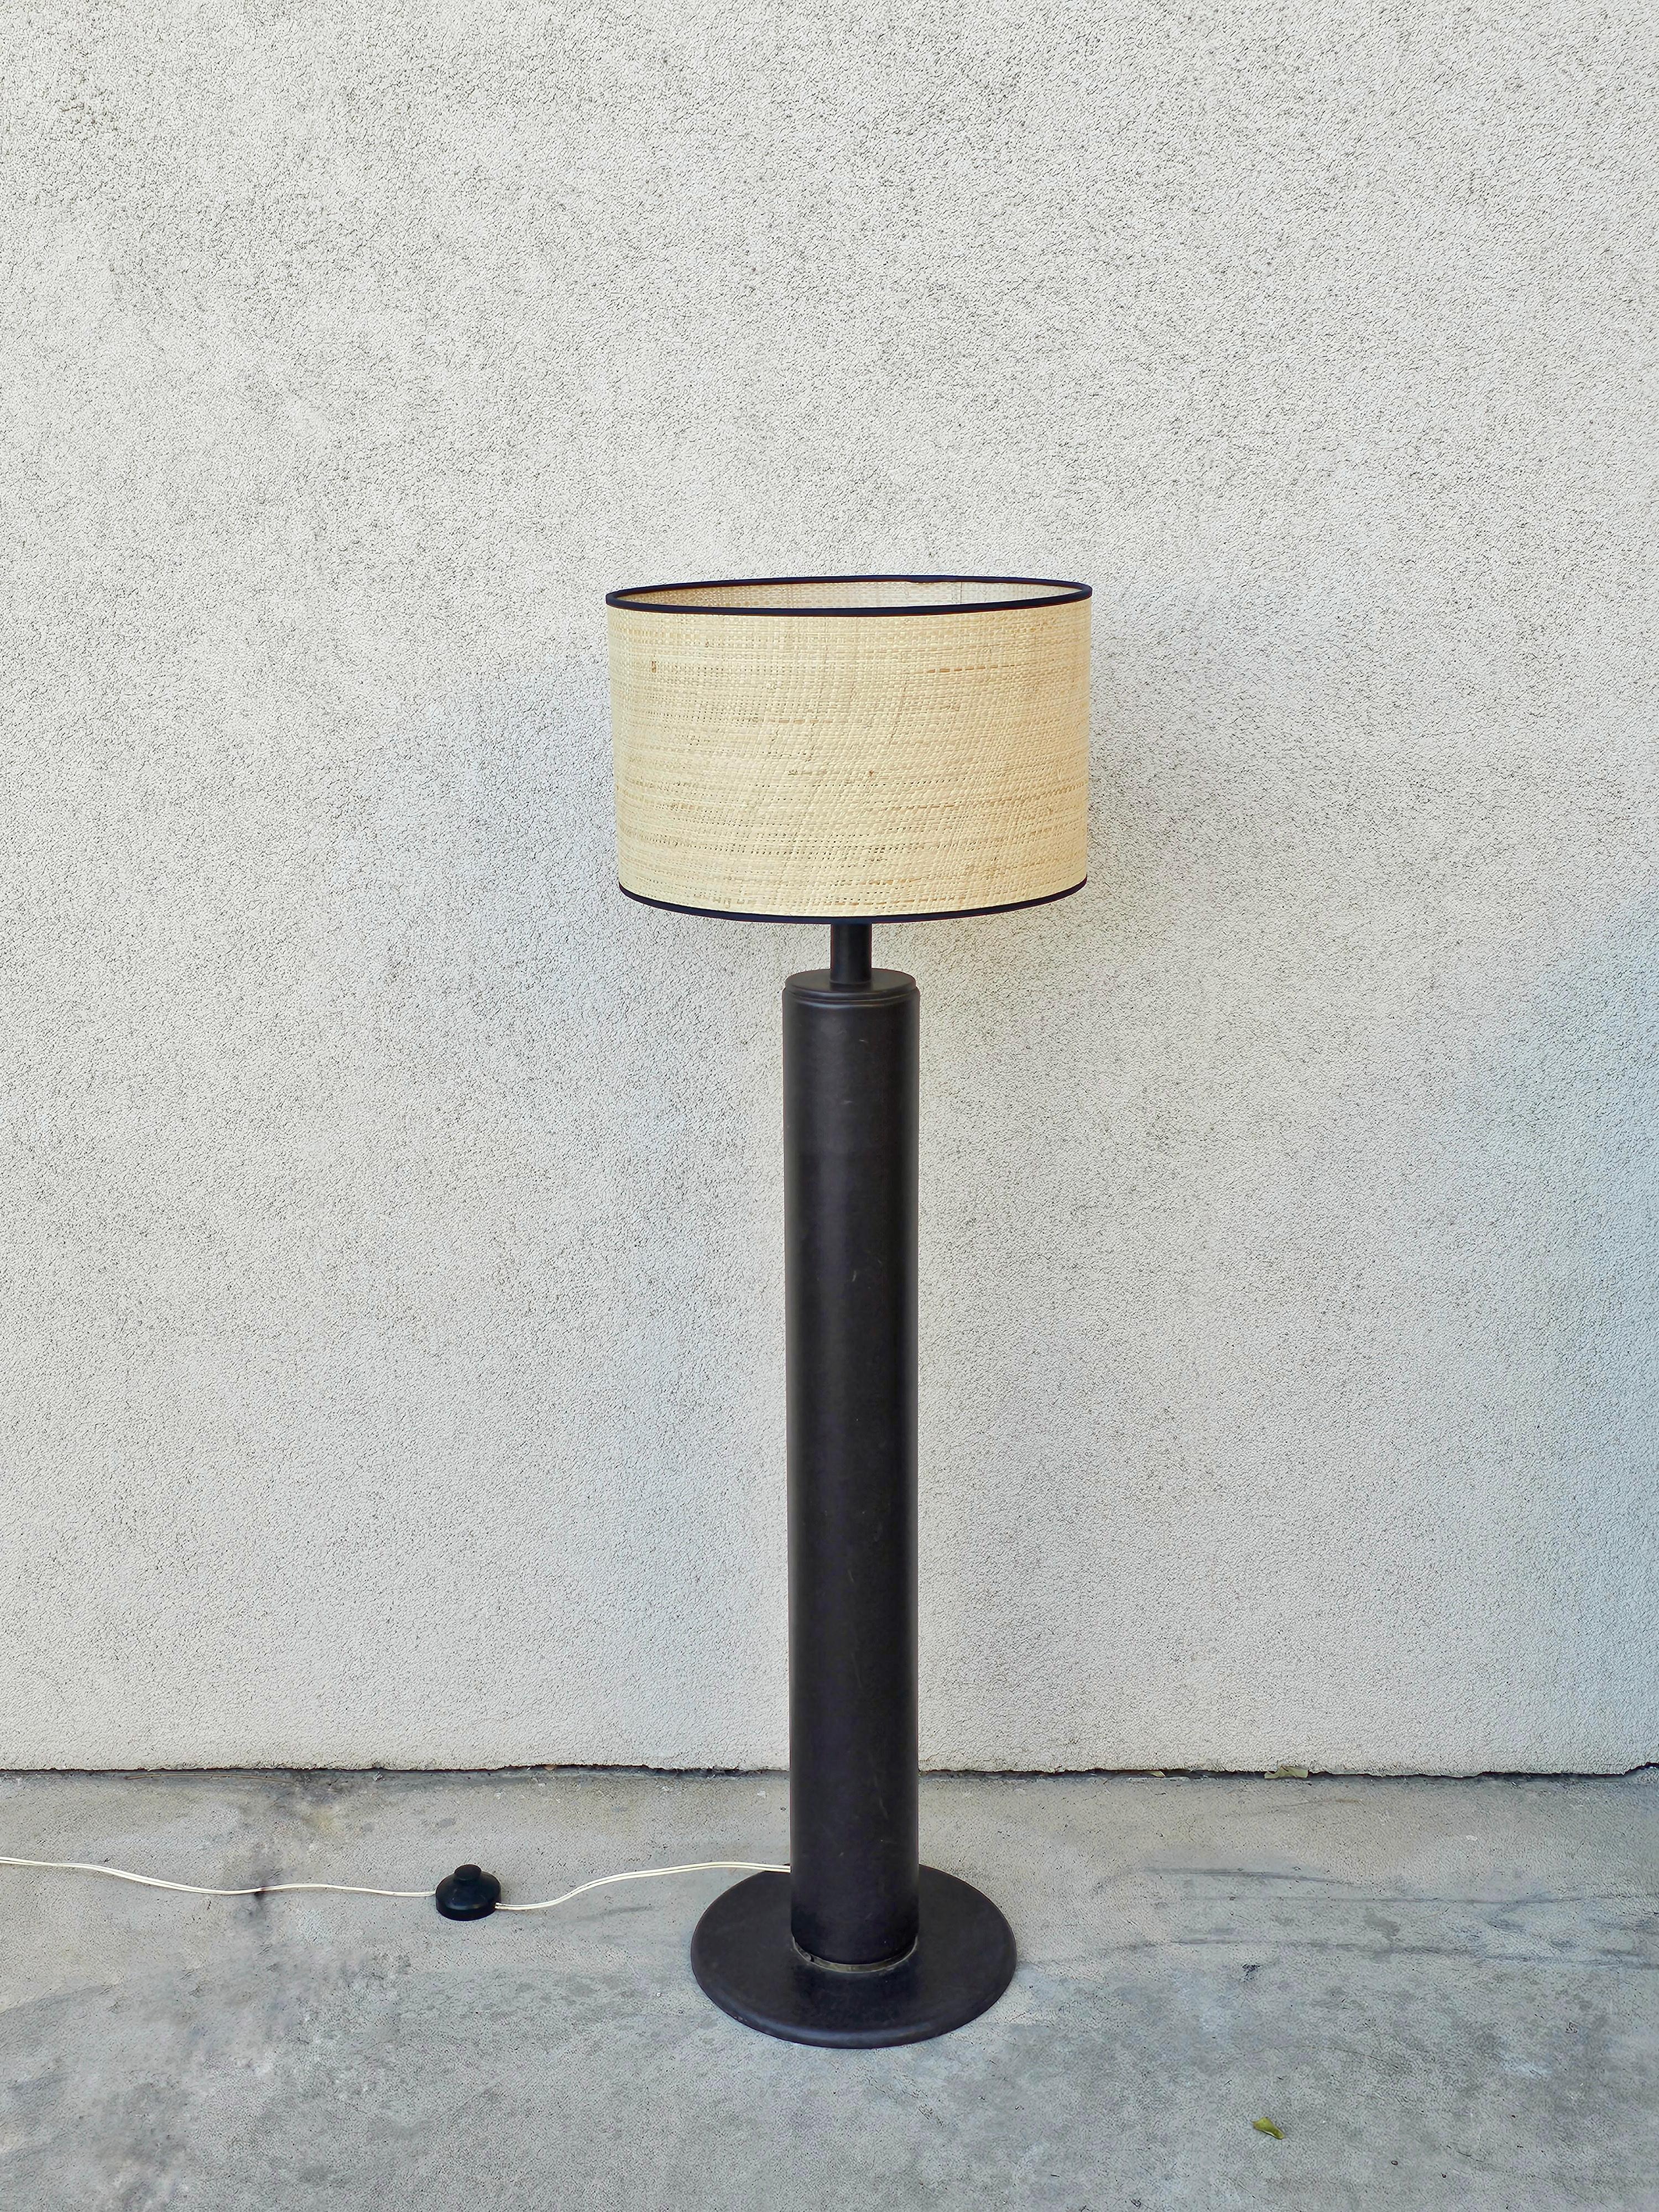 Late 20th Century Mid Century Modern Leather Floor Lamp by Nicetin, Yugoslavia 1980s For Sale